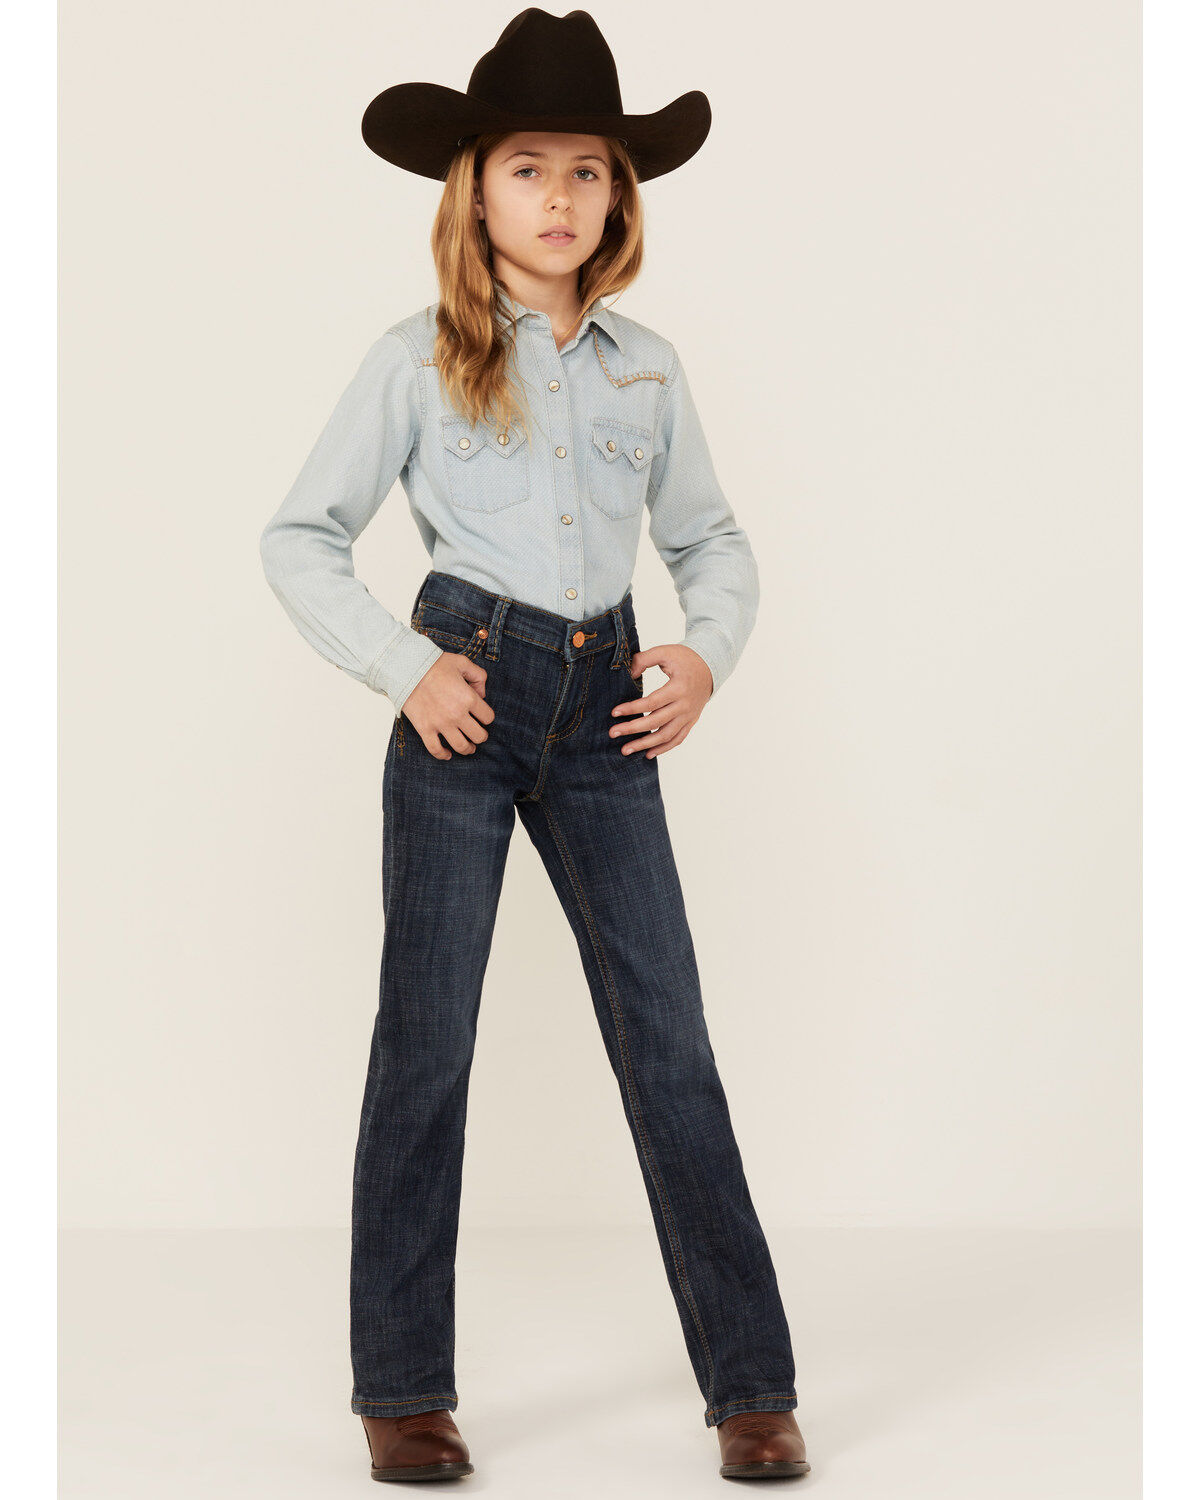 Girl's Jeans: Western Jeans \u0026 More 